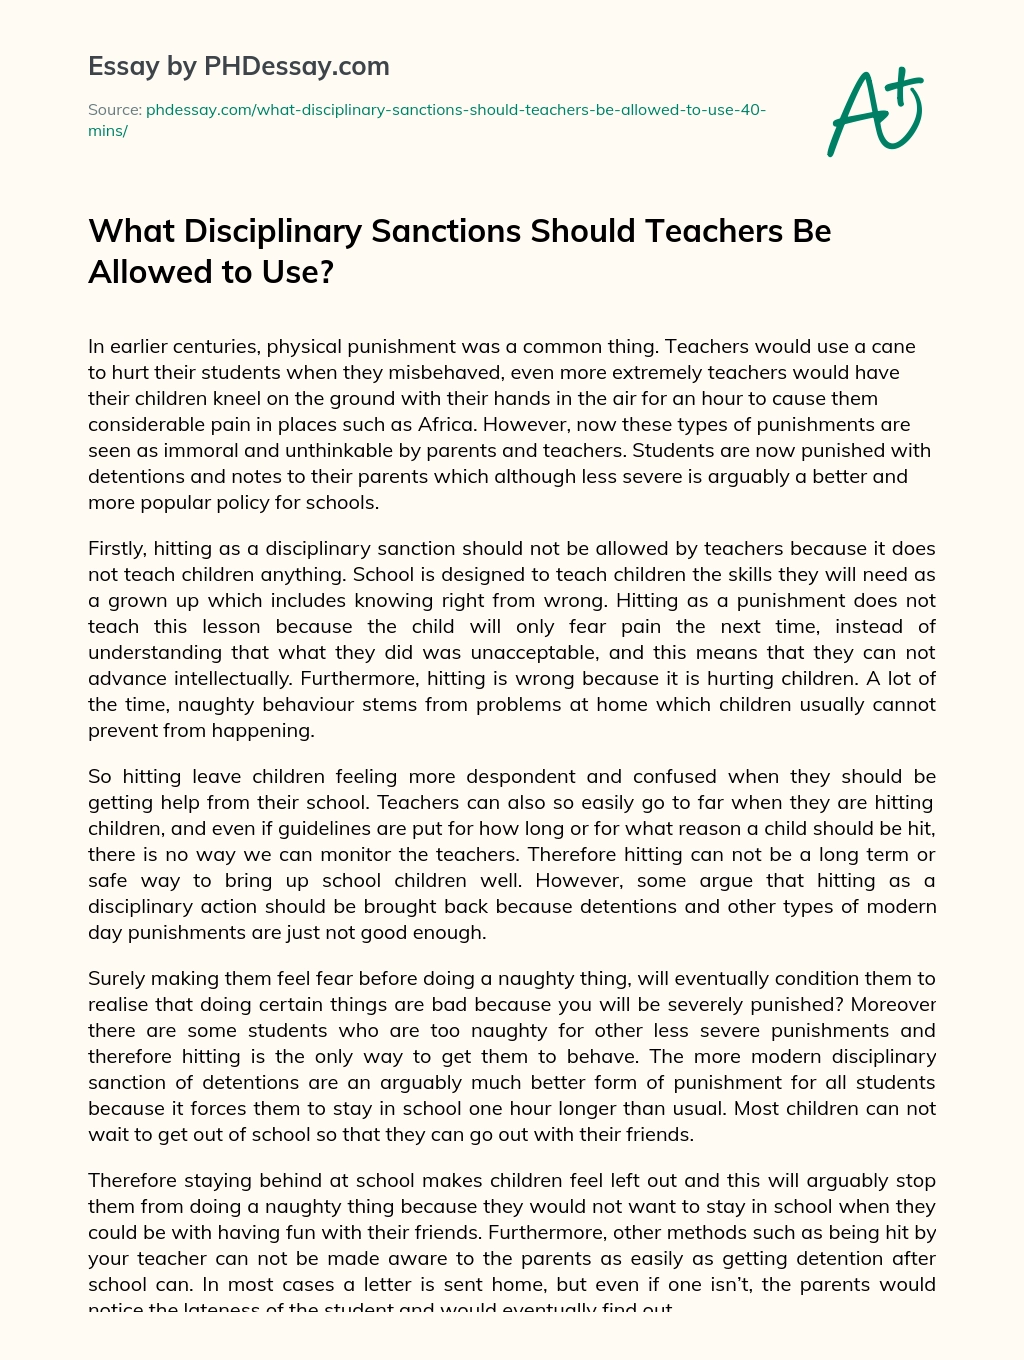 What Disciplinary Sanctions Should Teachers Be Allowed to Use? essay